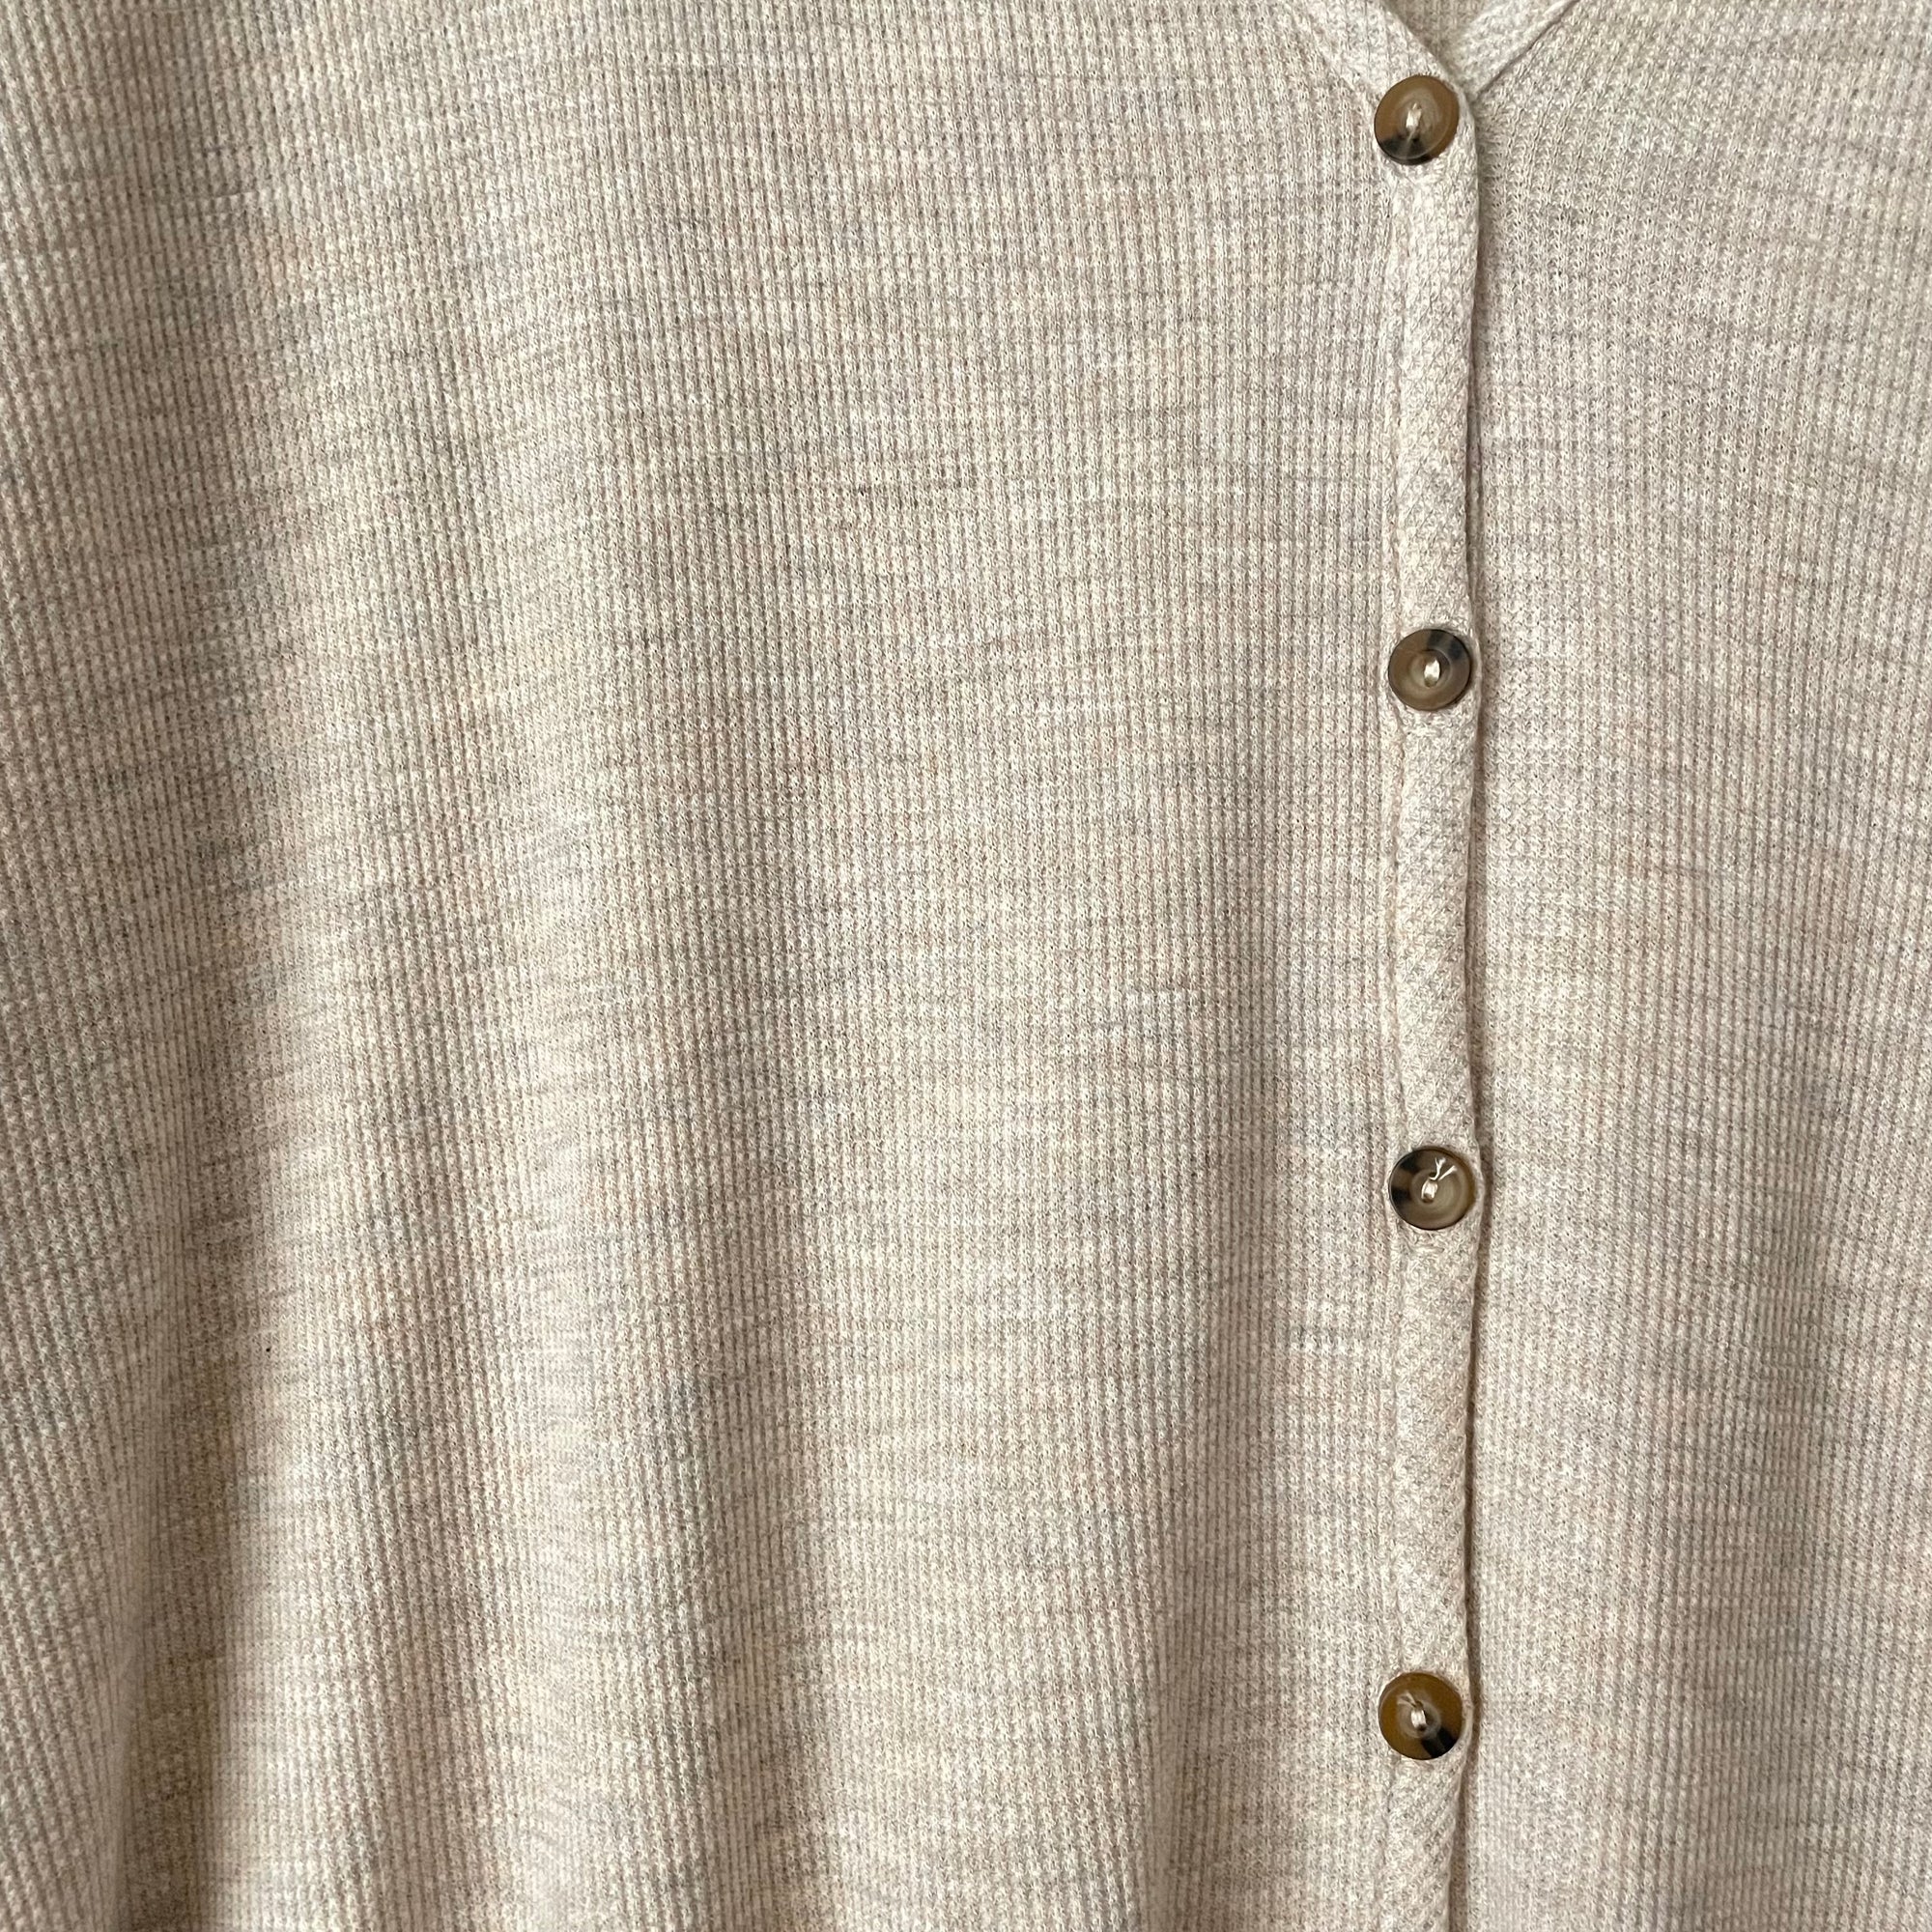 Speckled Waffle Knit Button Up Top in Oatmeal